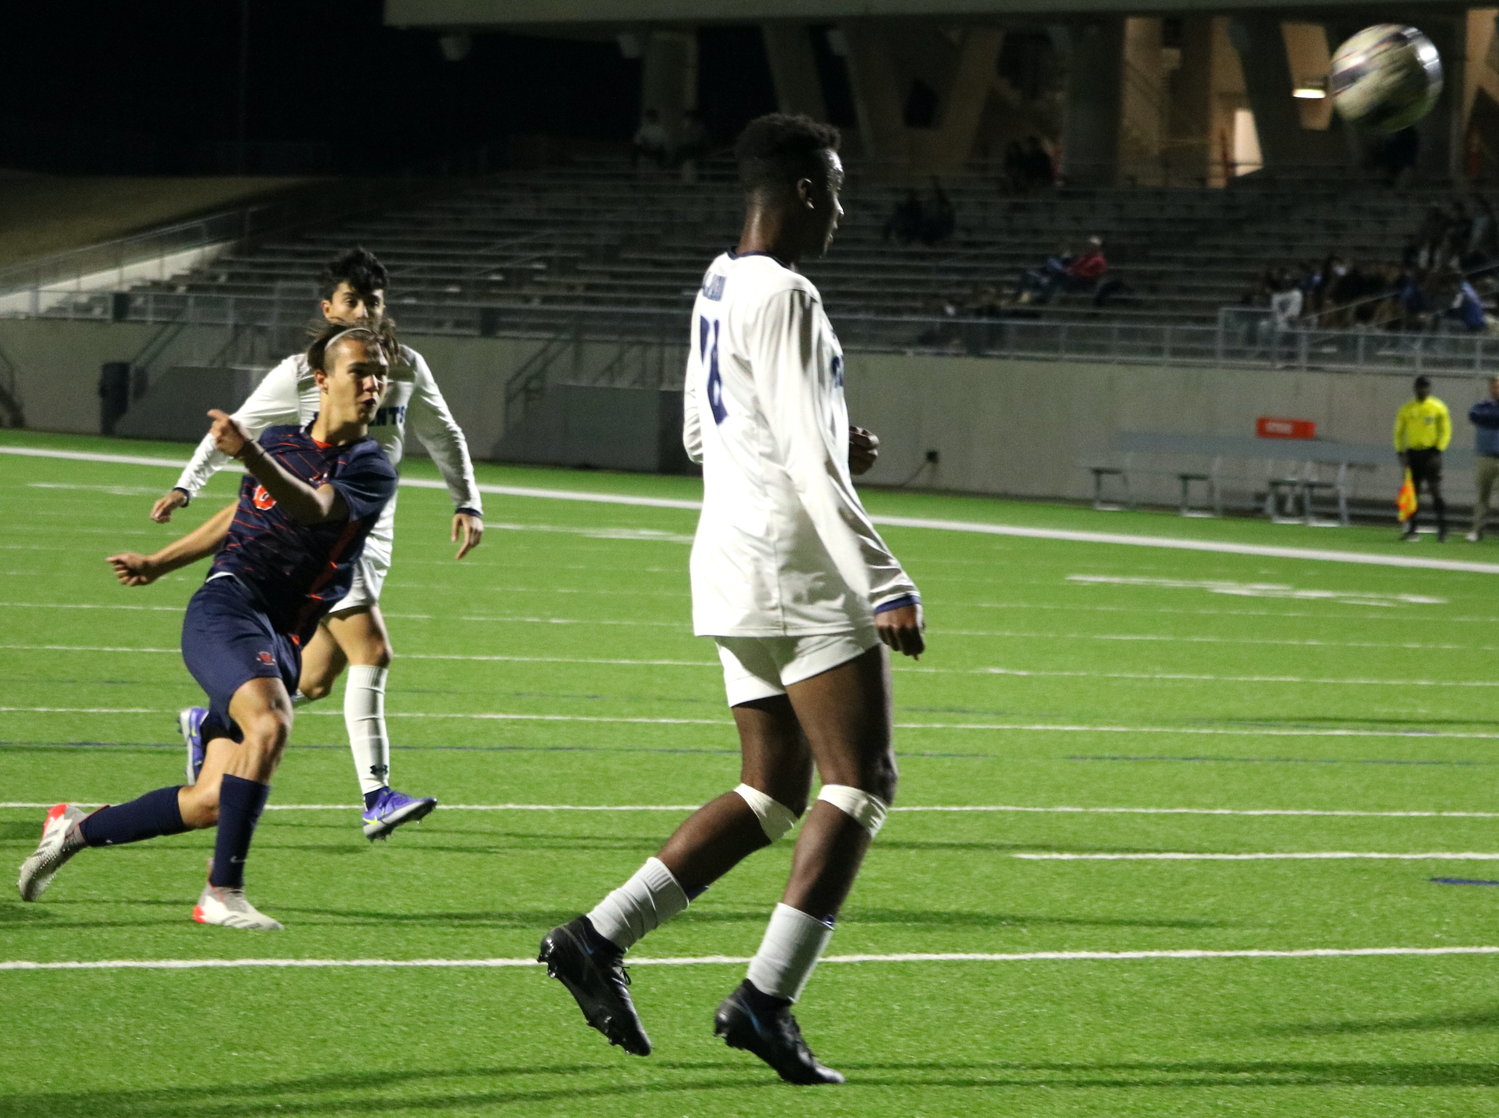 Kortacy Koc hits a volley towards goal during Thursday’s Class 6A bi-district game between Seven Lakes and Fort Bend Clements at Legacy Stadium.